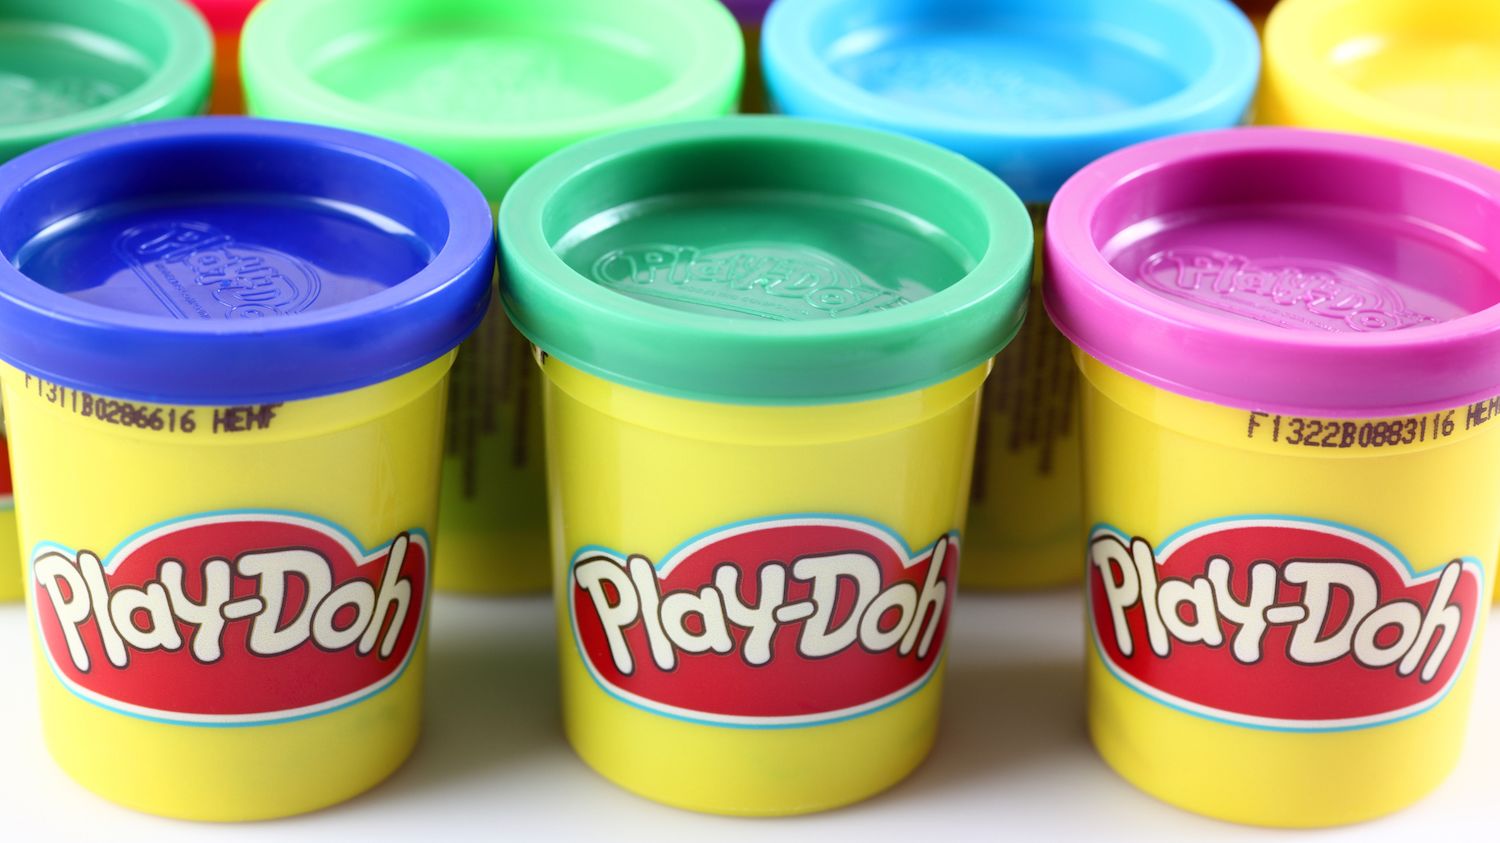 cheapest place to buy play doh